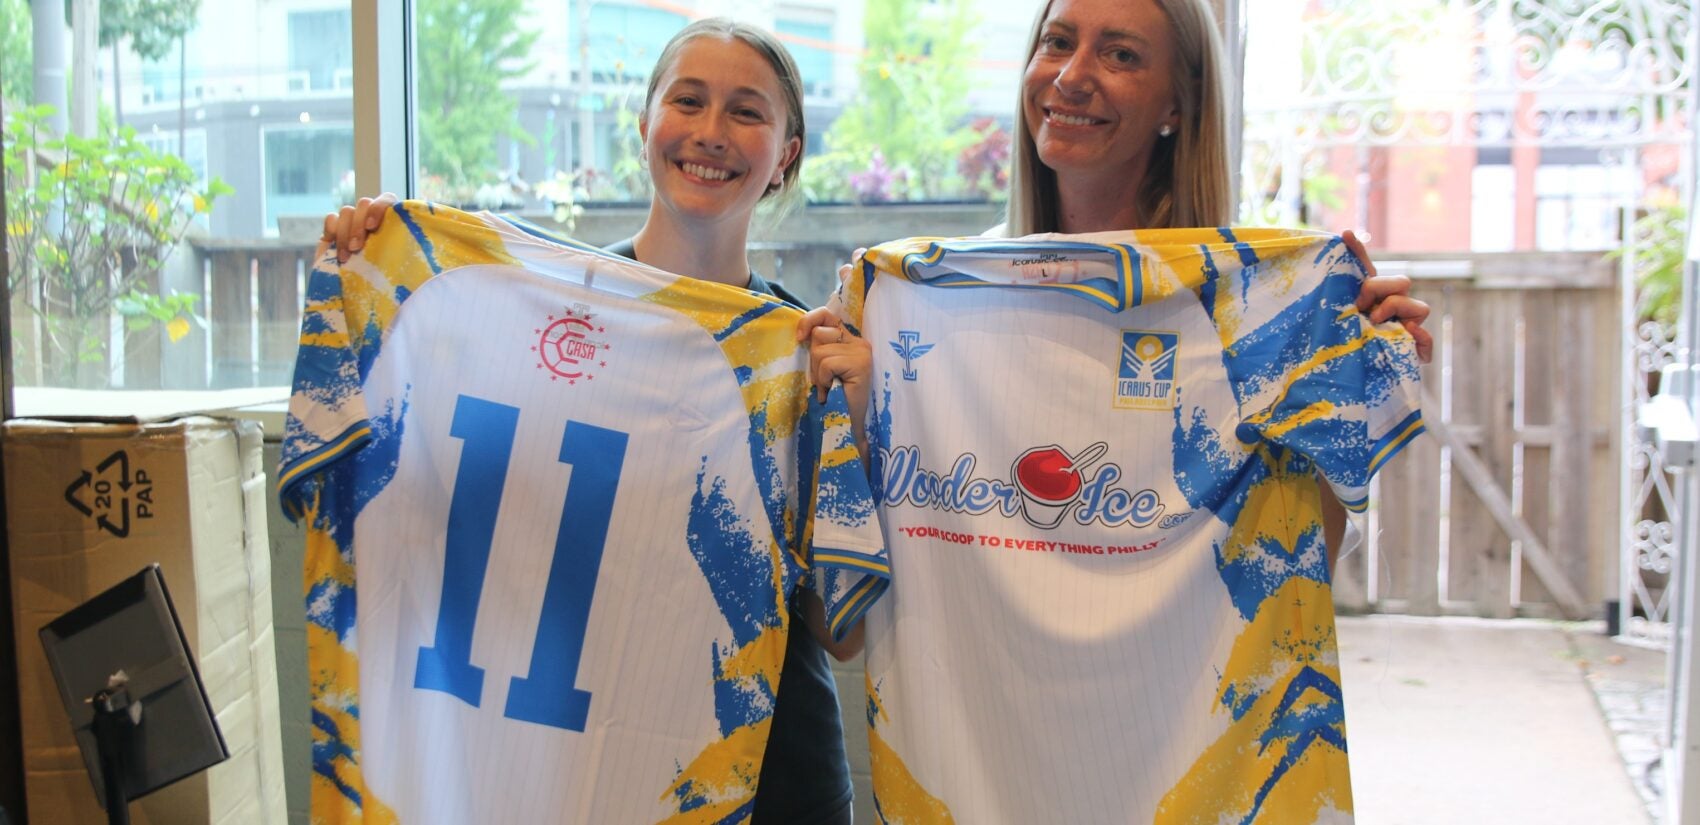 Charm City FC picked up their kits featuring Wooder Ice as a shirt sponsor. (Cory Sharber/WHYY)